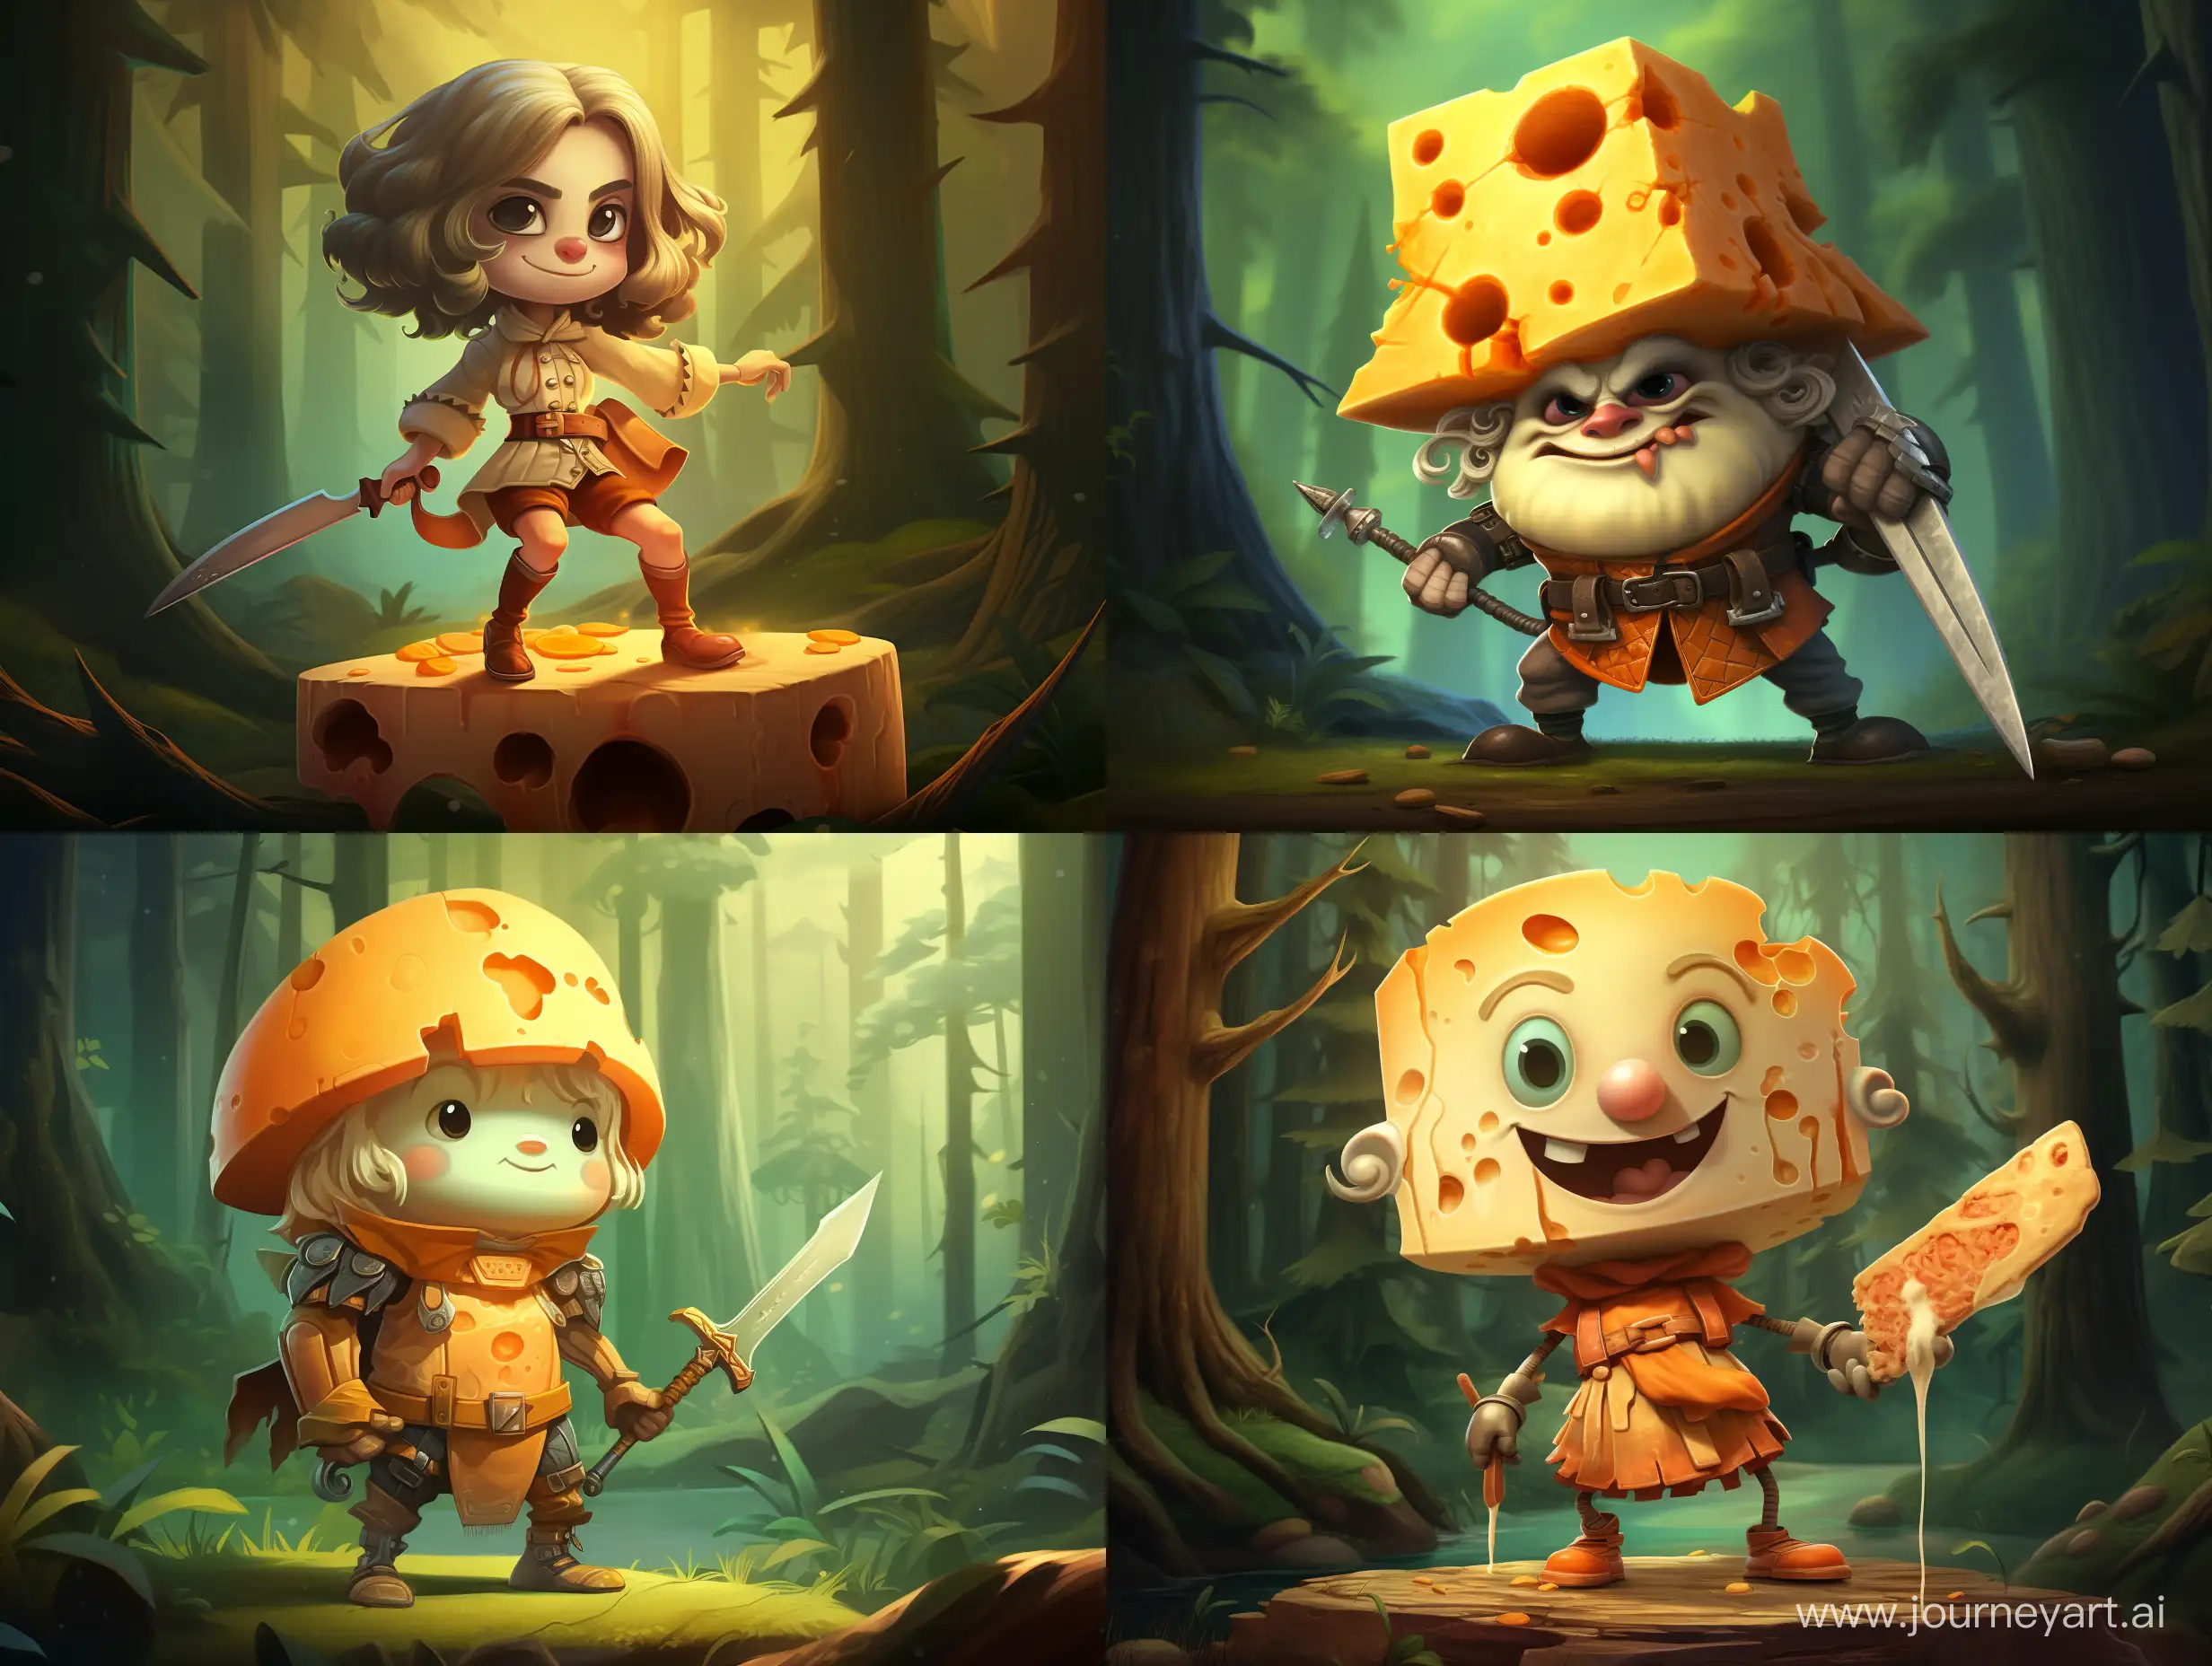 Whimsical-Cheese-Knight-with-Sword-in-Enchanting-Forest